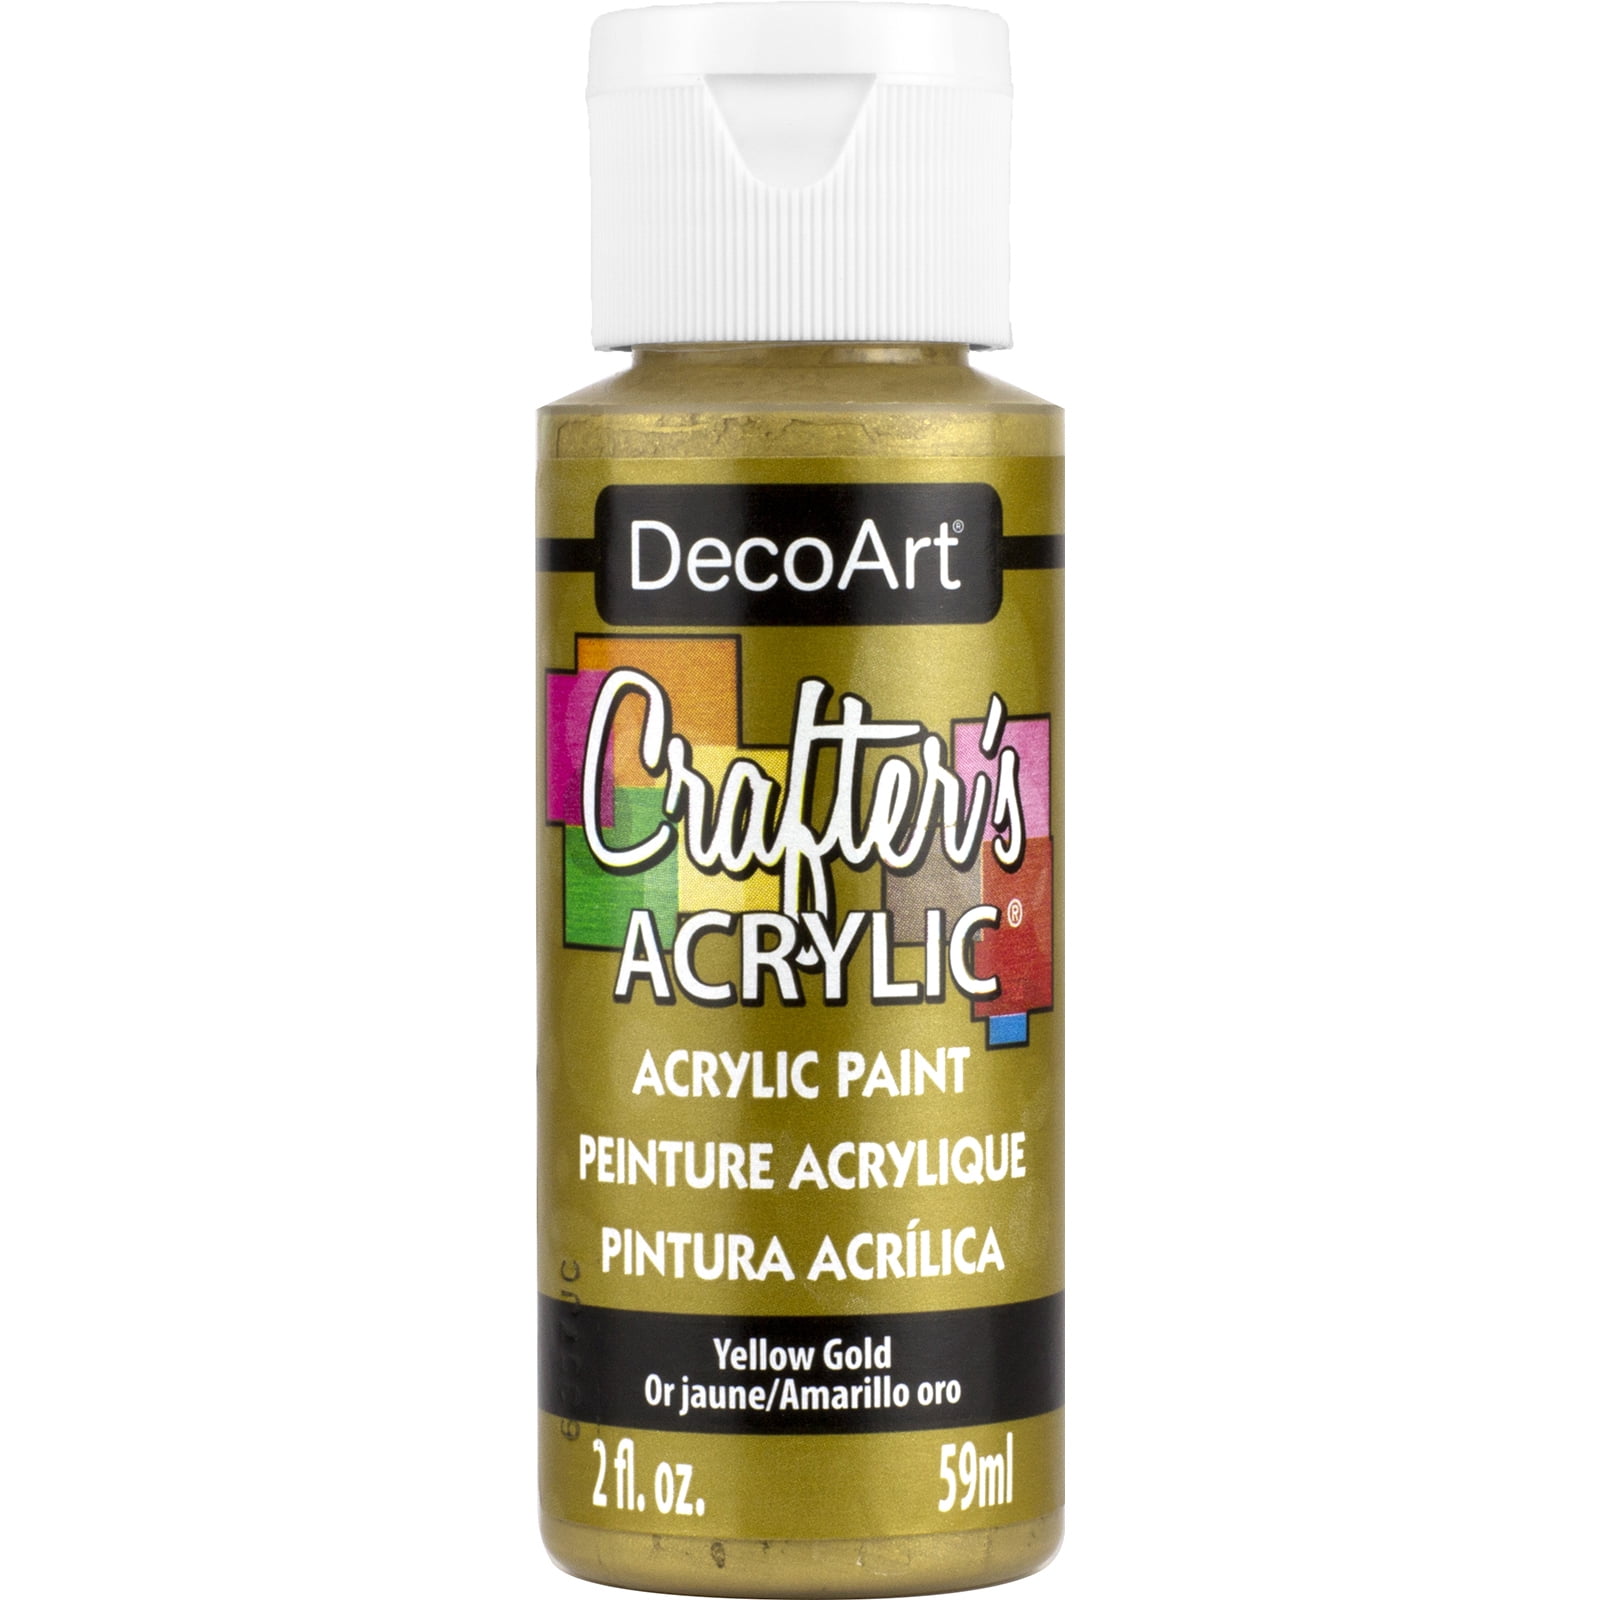 Decoart Crafters Acrylic Paints - Neon coloured paints - pack of 6 or 8  colours - be bright!